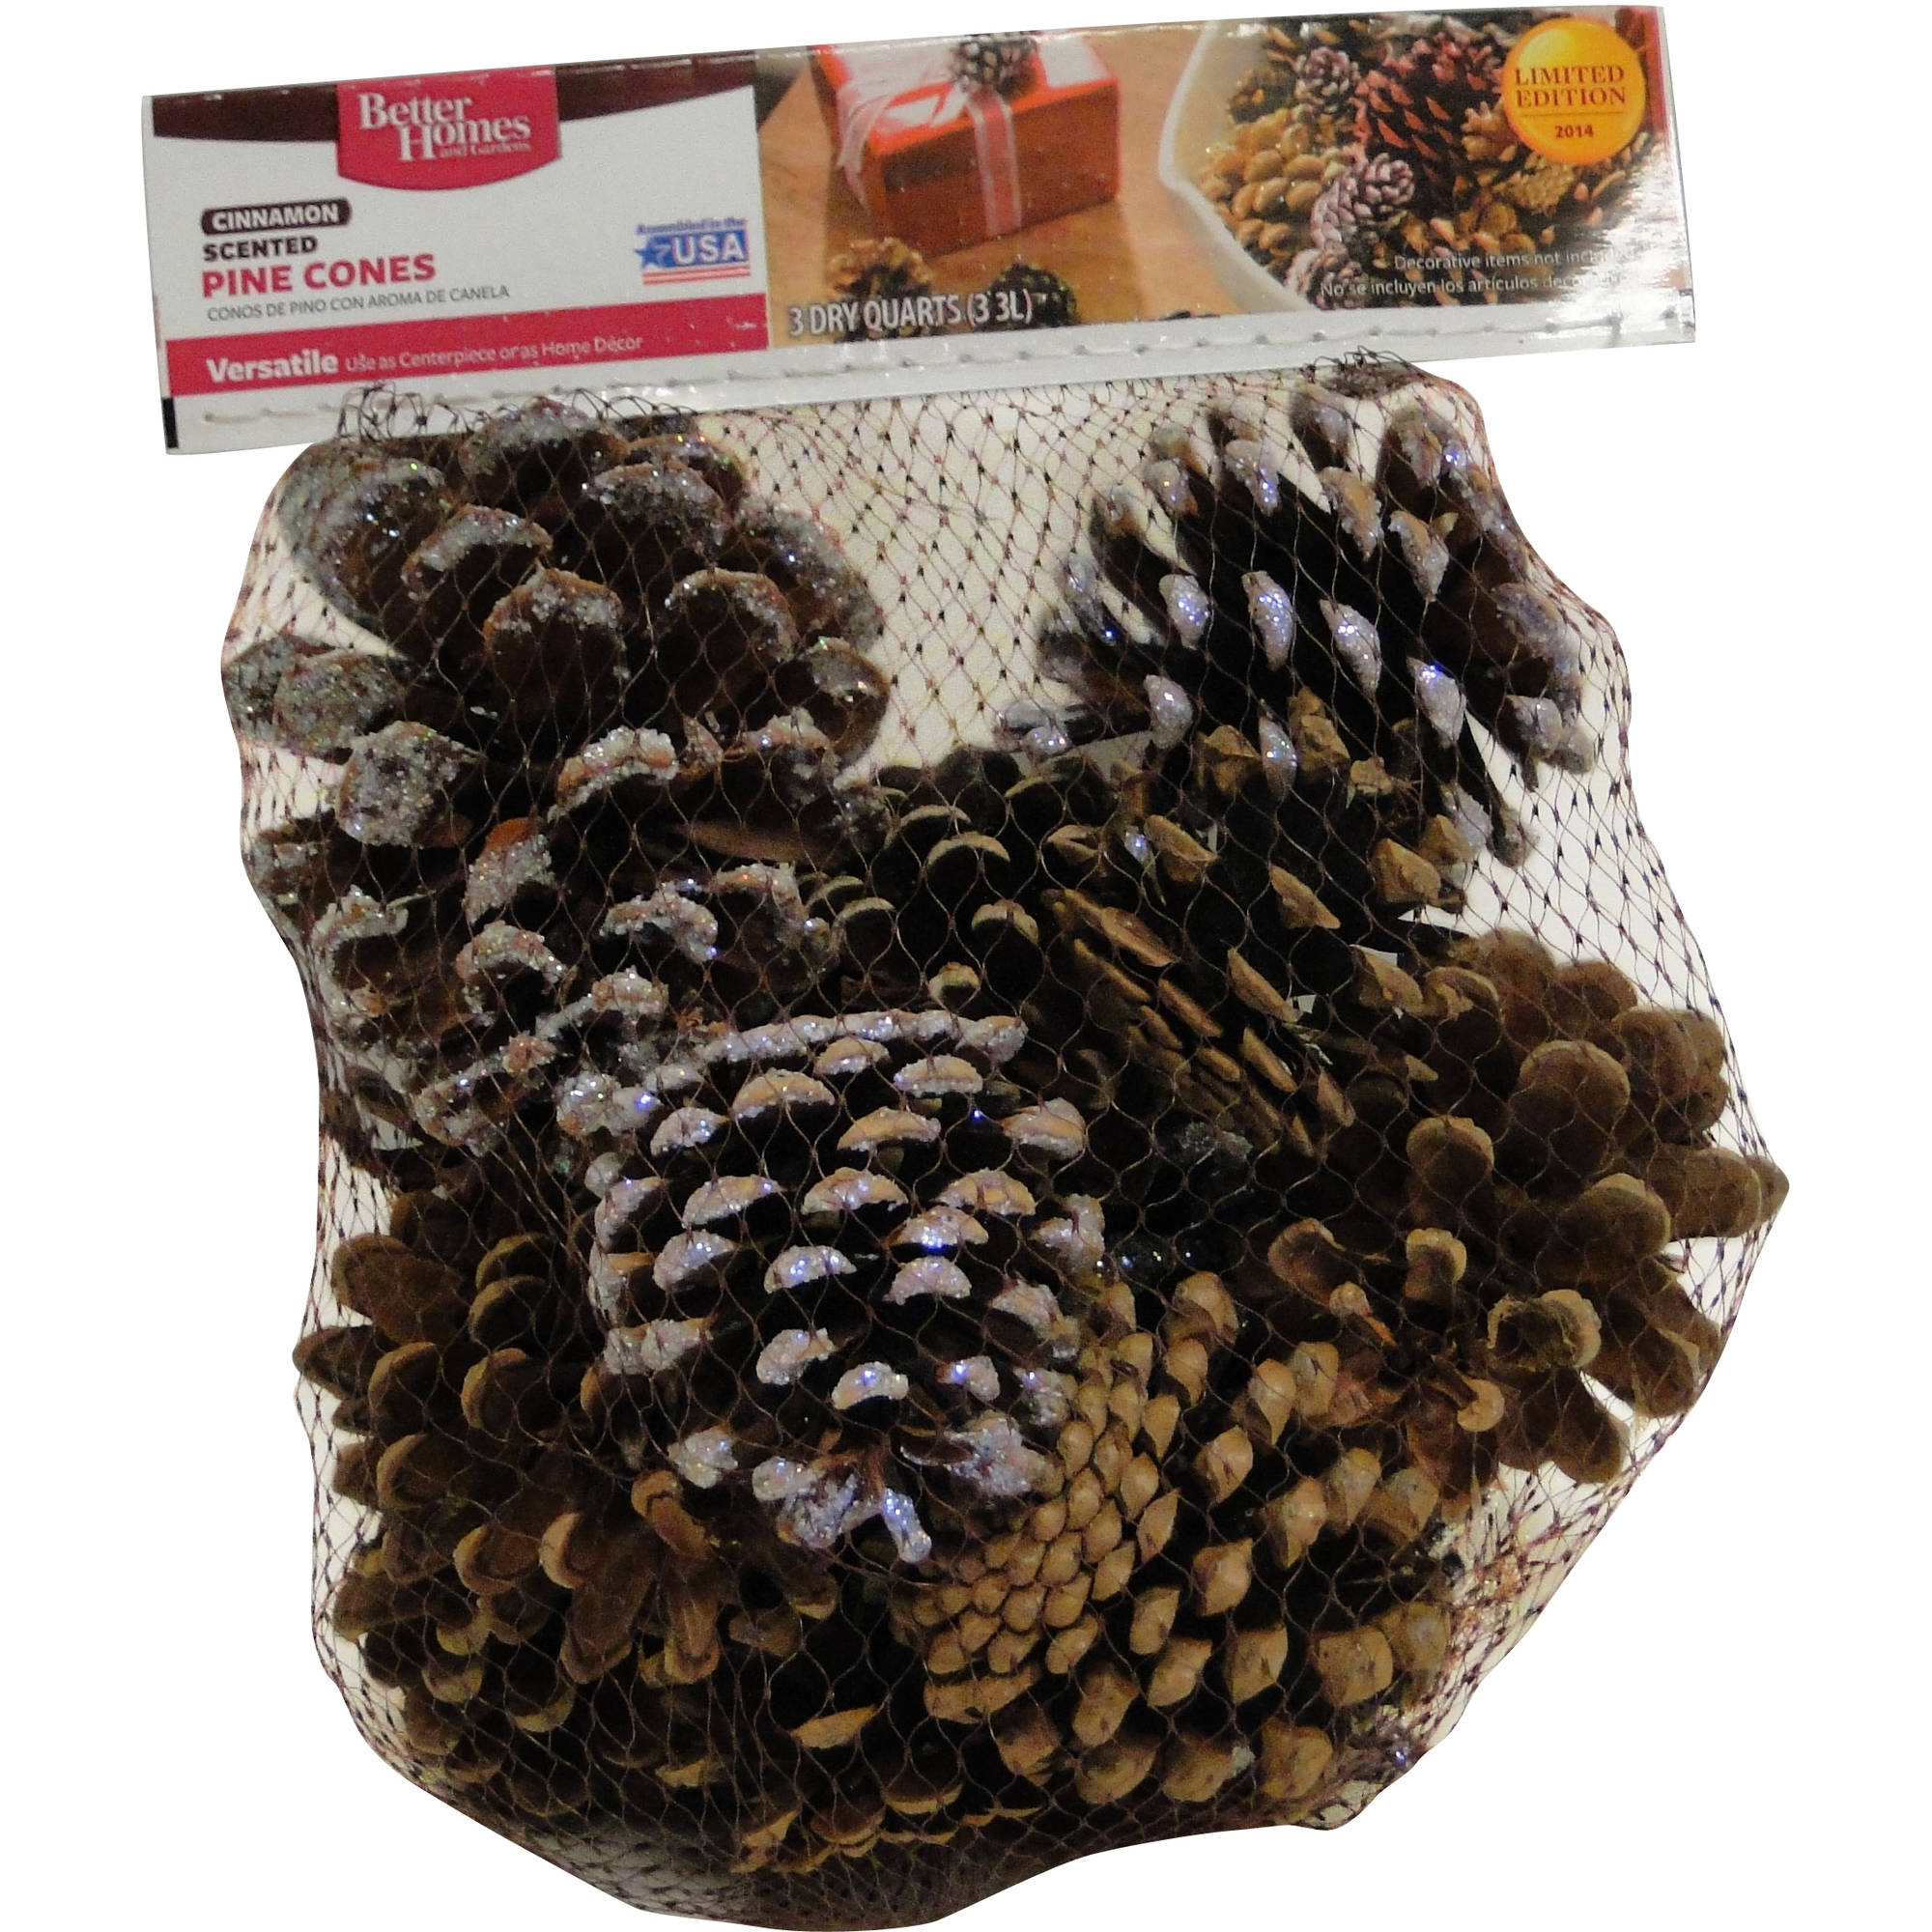 Better Homes and Gardens Cinnamon-Scented Illusion Glitter Pine Cones - image 1 of 1